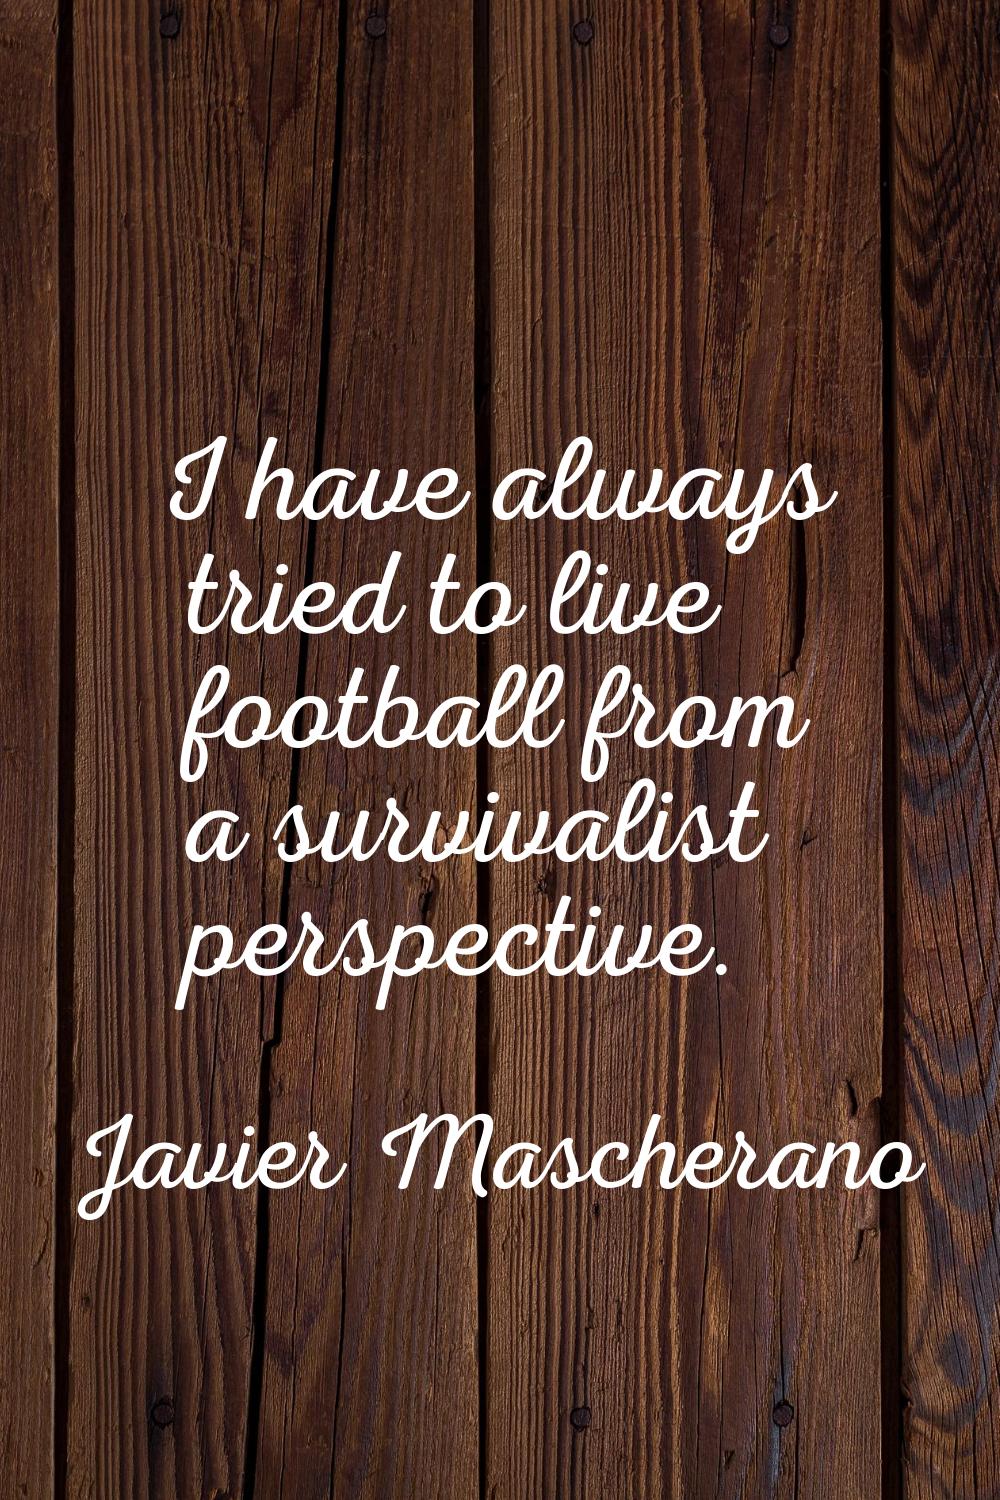 I have always tried to live football from a survivalist perspective.